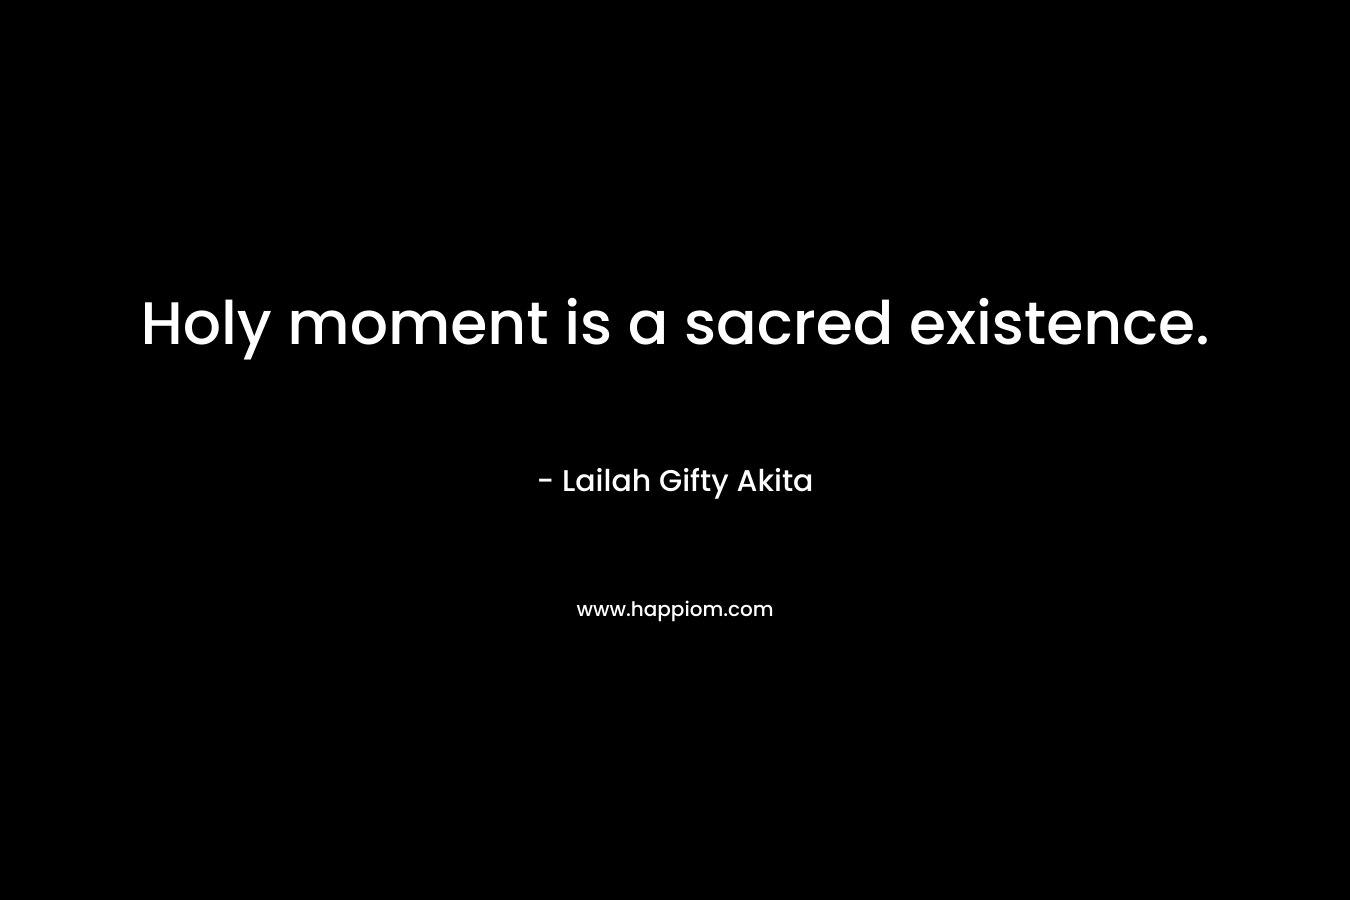 Holy moment is a sacred existence.